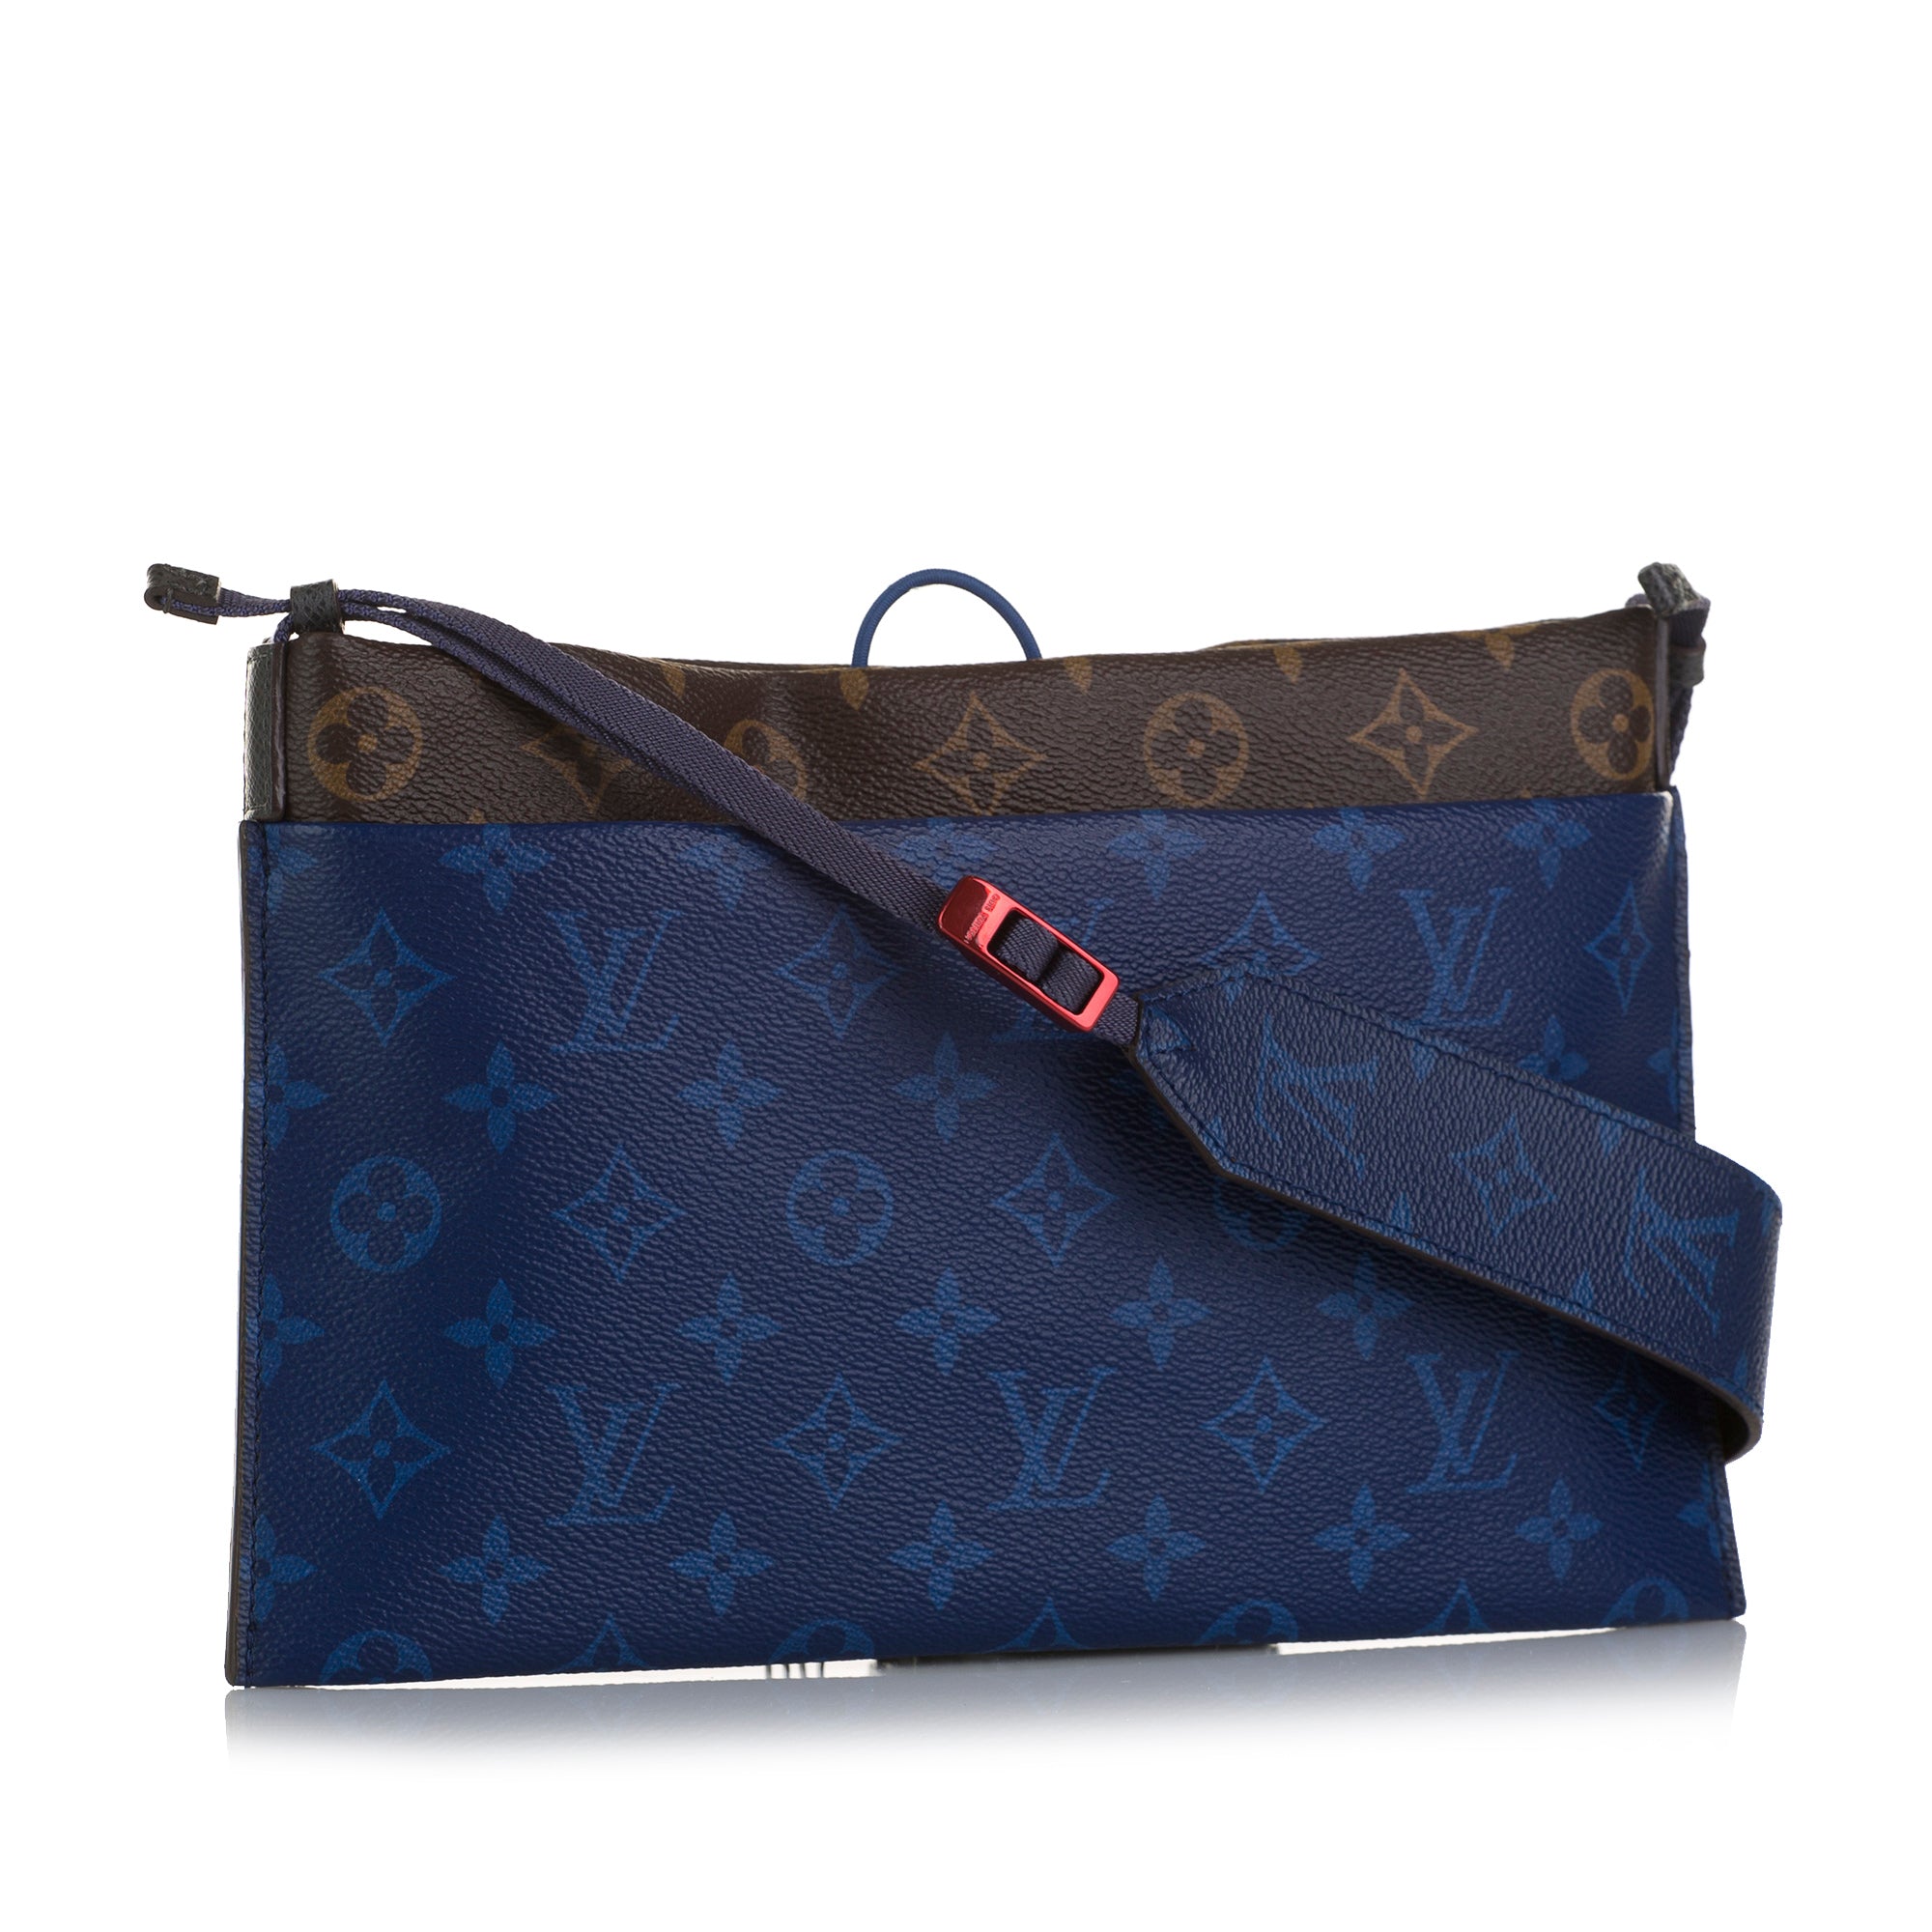 Luxury products - LV postman bag is made by Monogram and